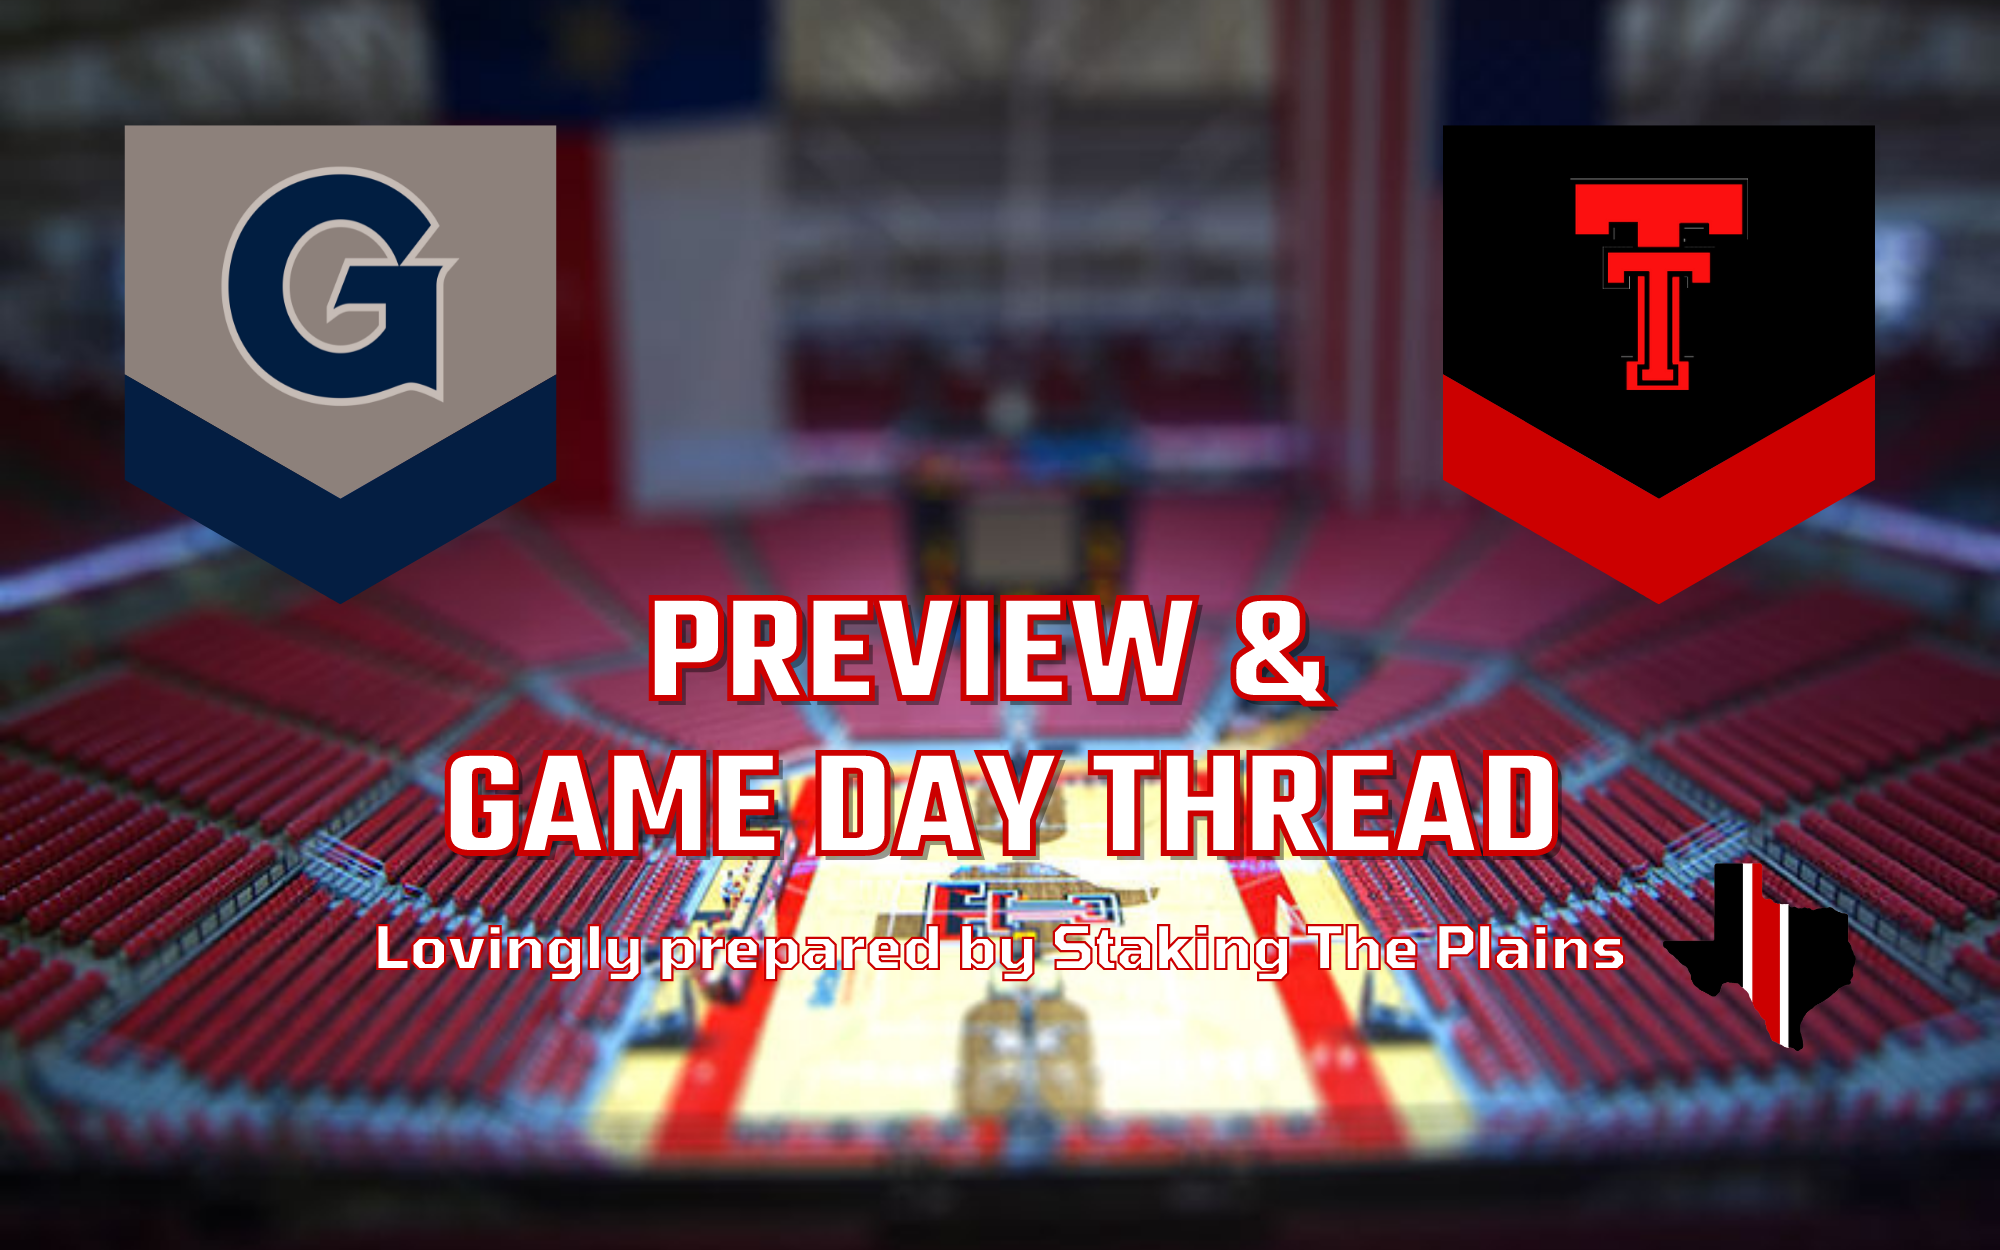 Preview & Game Day Thread: Georgetown vs. Texas Tech